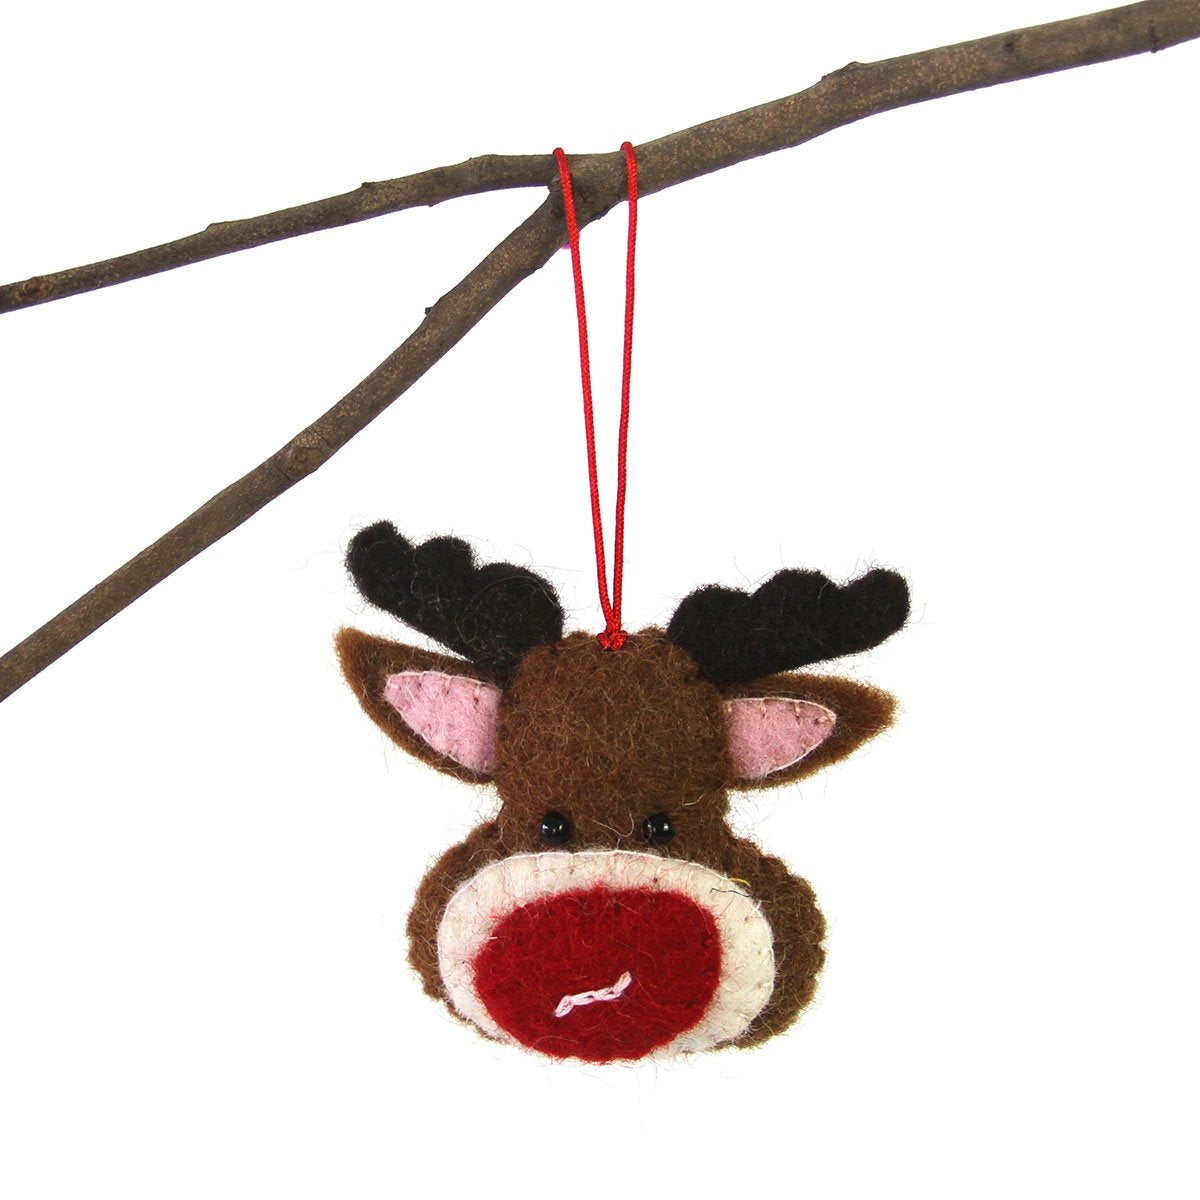 Hand Felted Christmas Ornament: Rudolph - Global Groove (H) - Linda Kay Gifford’s - Those Nasty Women TALK! by SWEETSurvivor